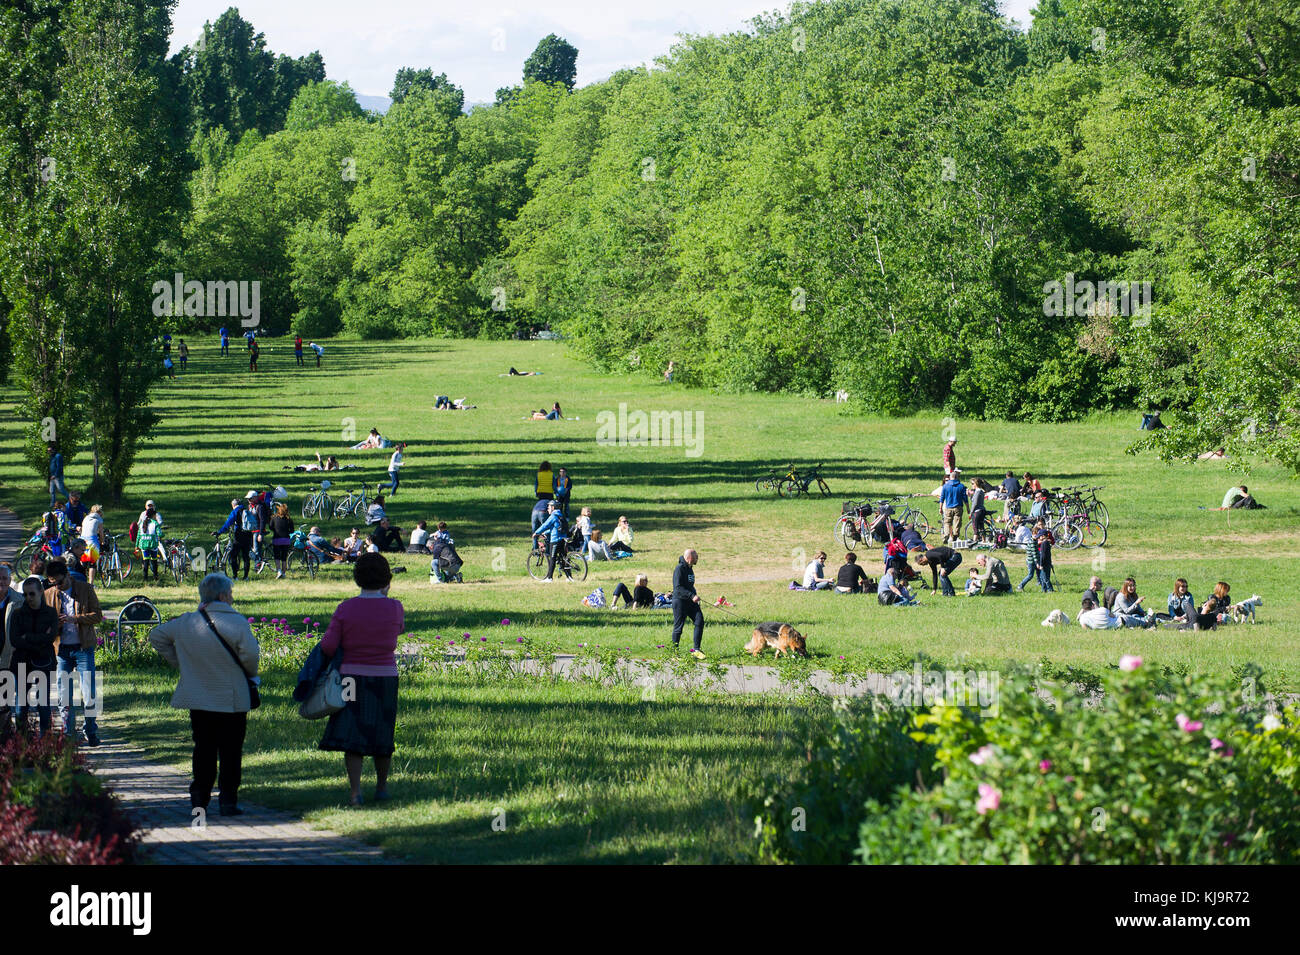 Parco Nord Milano is a metropolitan suburban park located on the northern outskirts of Milan. Classified as regional, it stretches between the towns of Milan, Bresso, Cusano Milanino, Cormano, Cinisello Balsamo, Sesto San Giovanni. Stock Photo